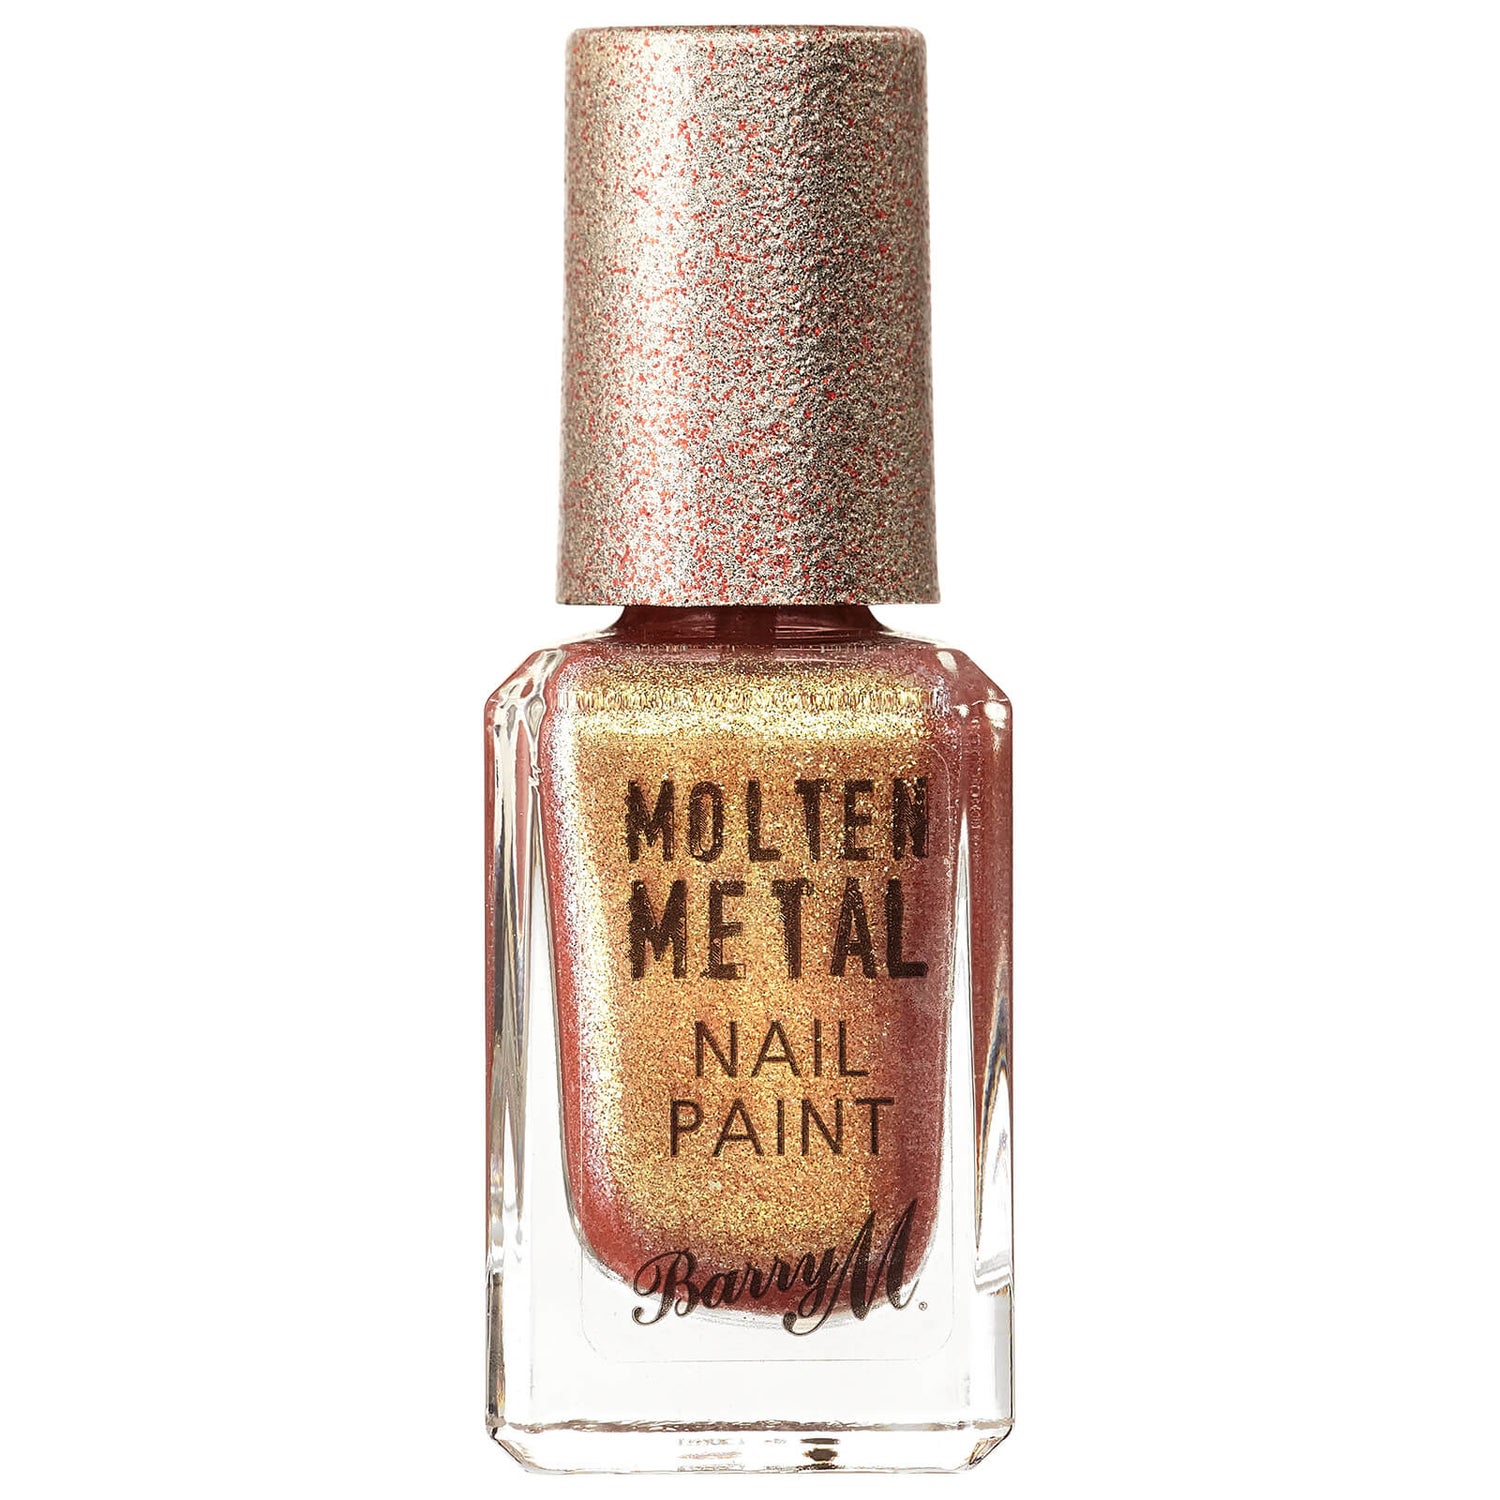 Barry M Cosmetics Molten Metal Nail Paint (Various Shades)